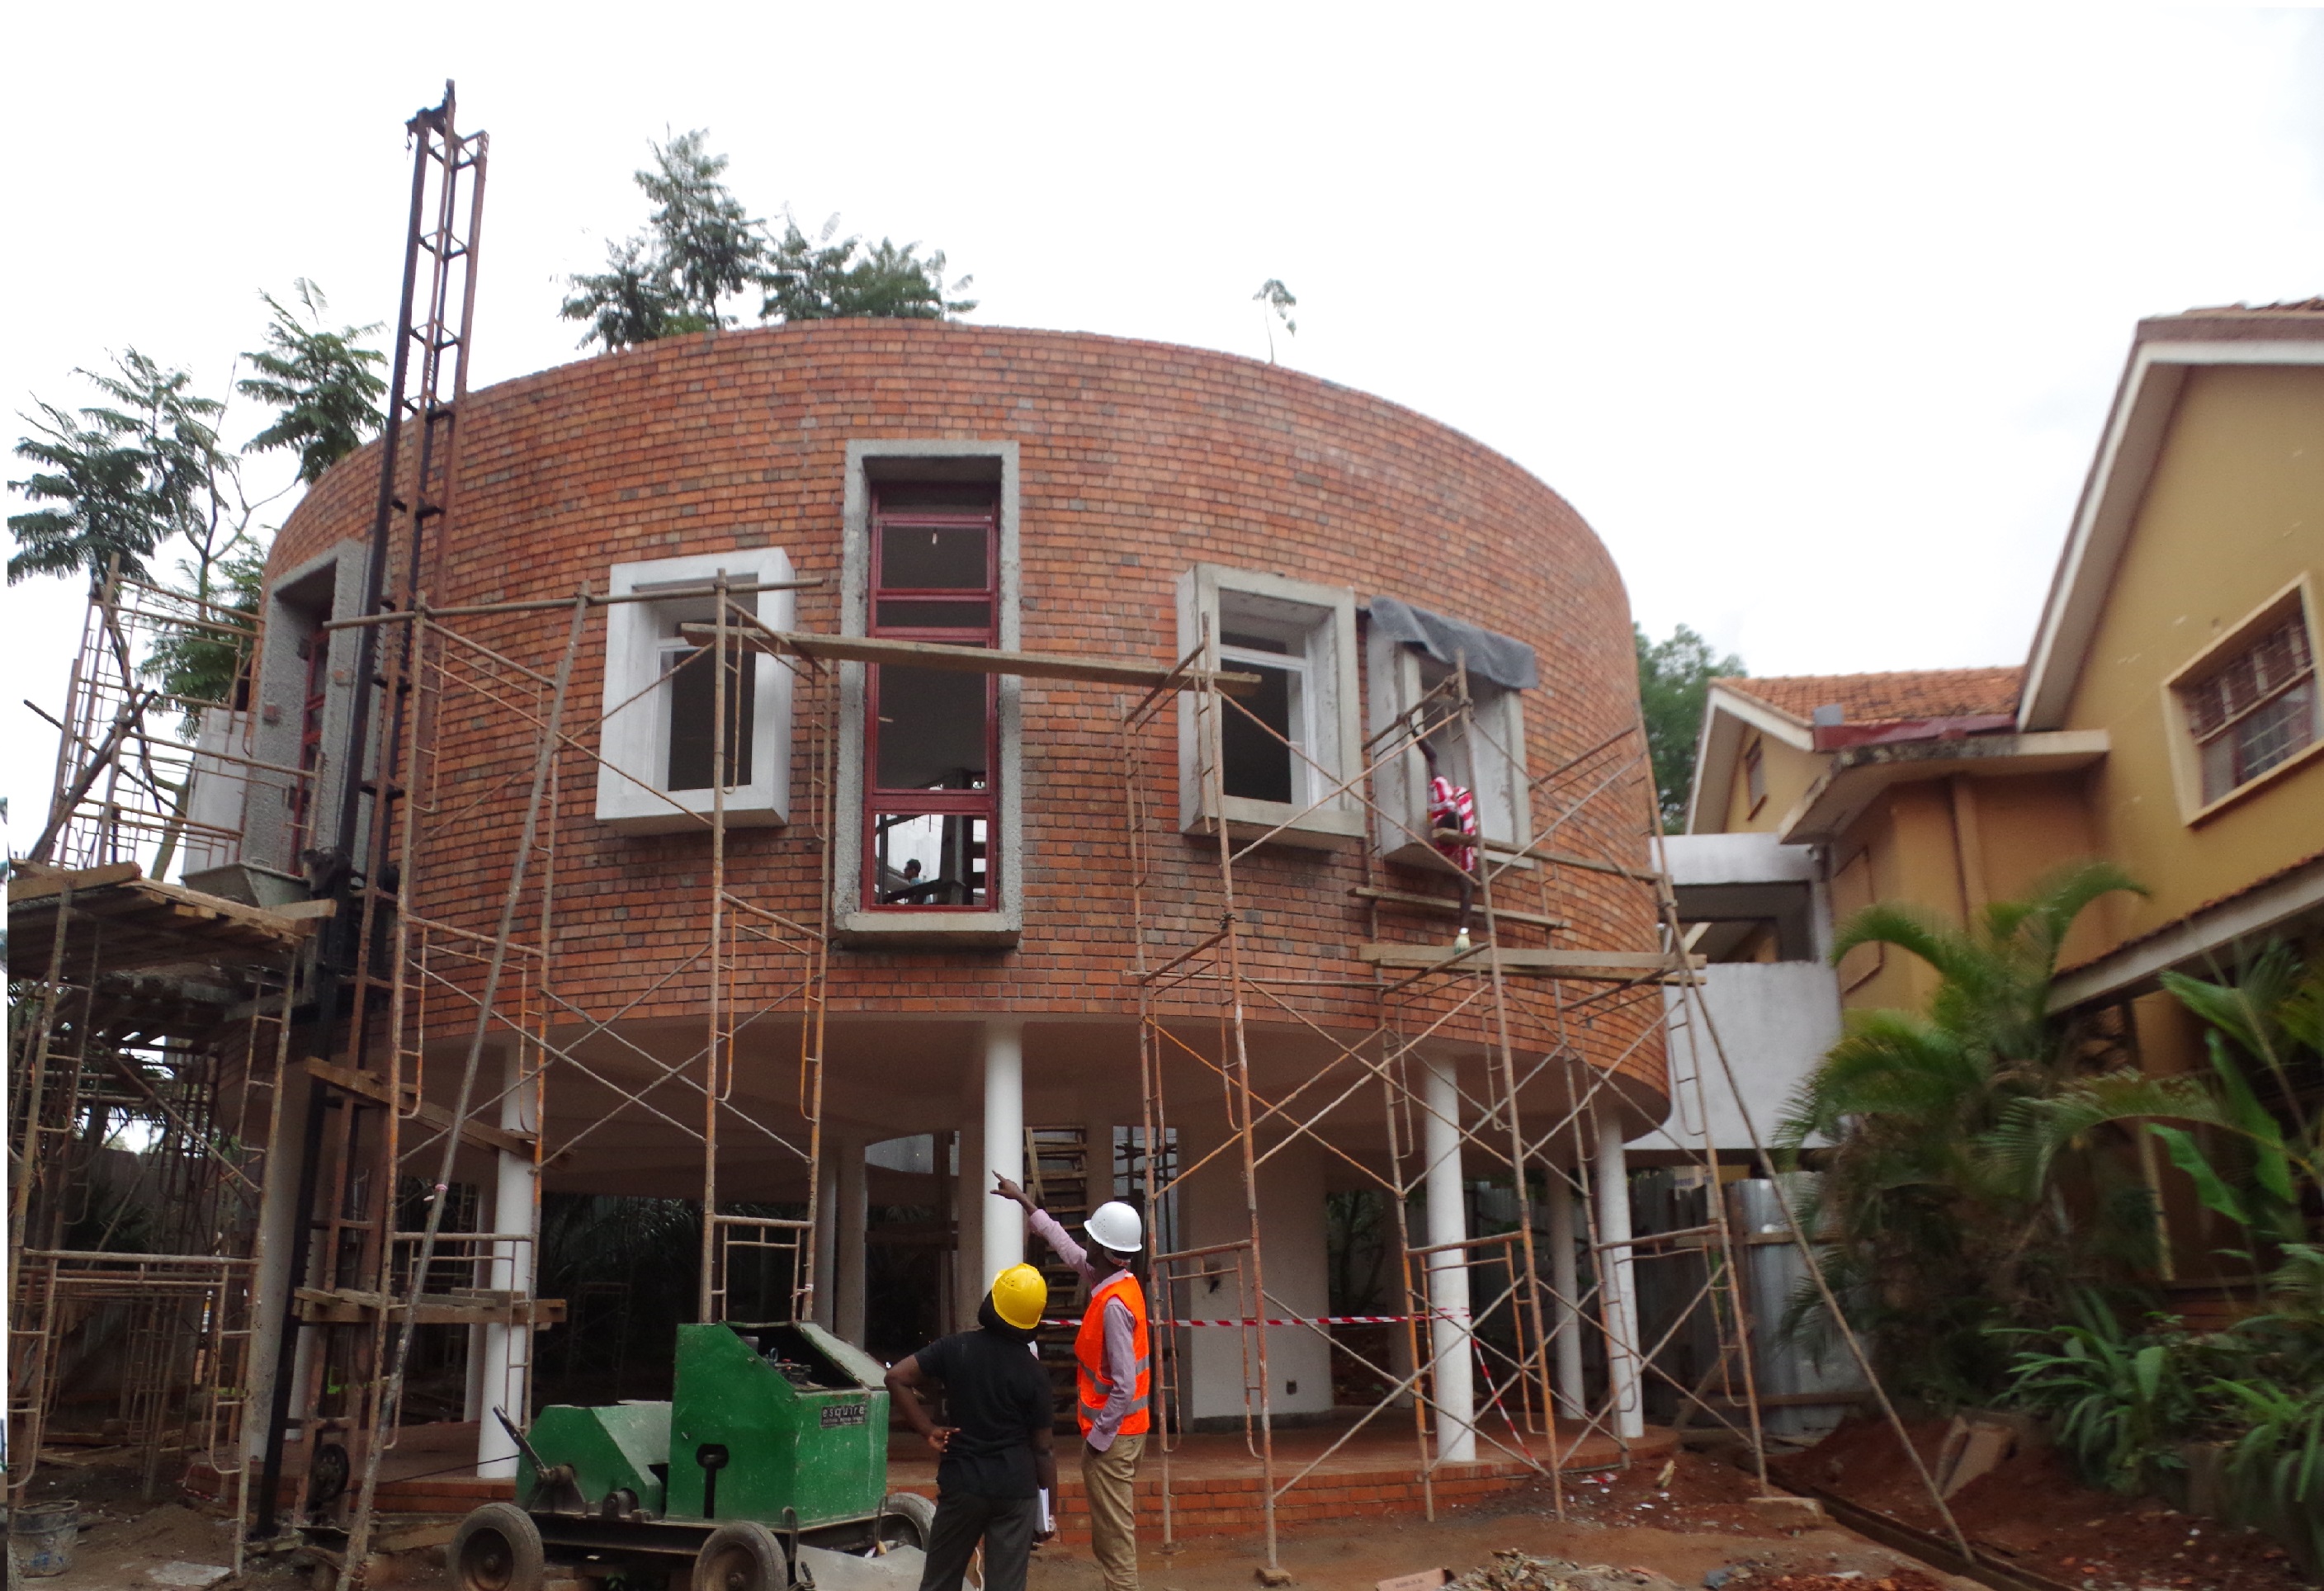 On going construction